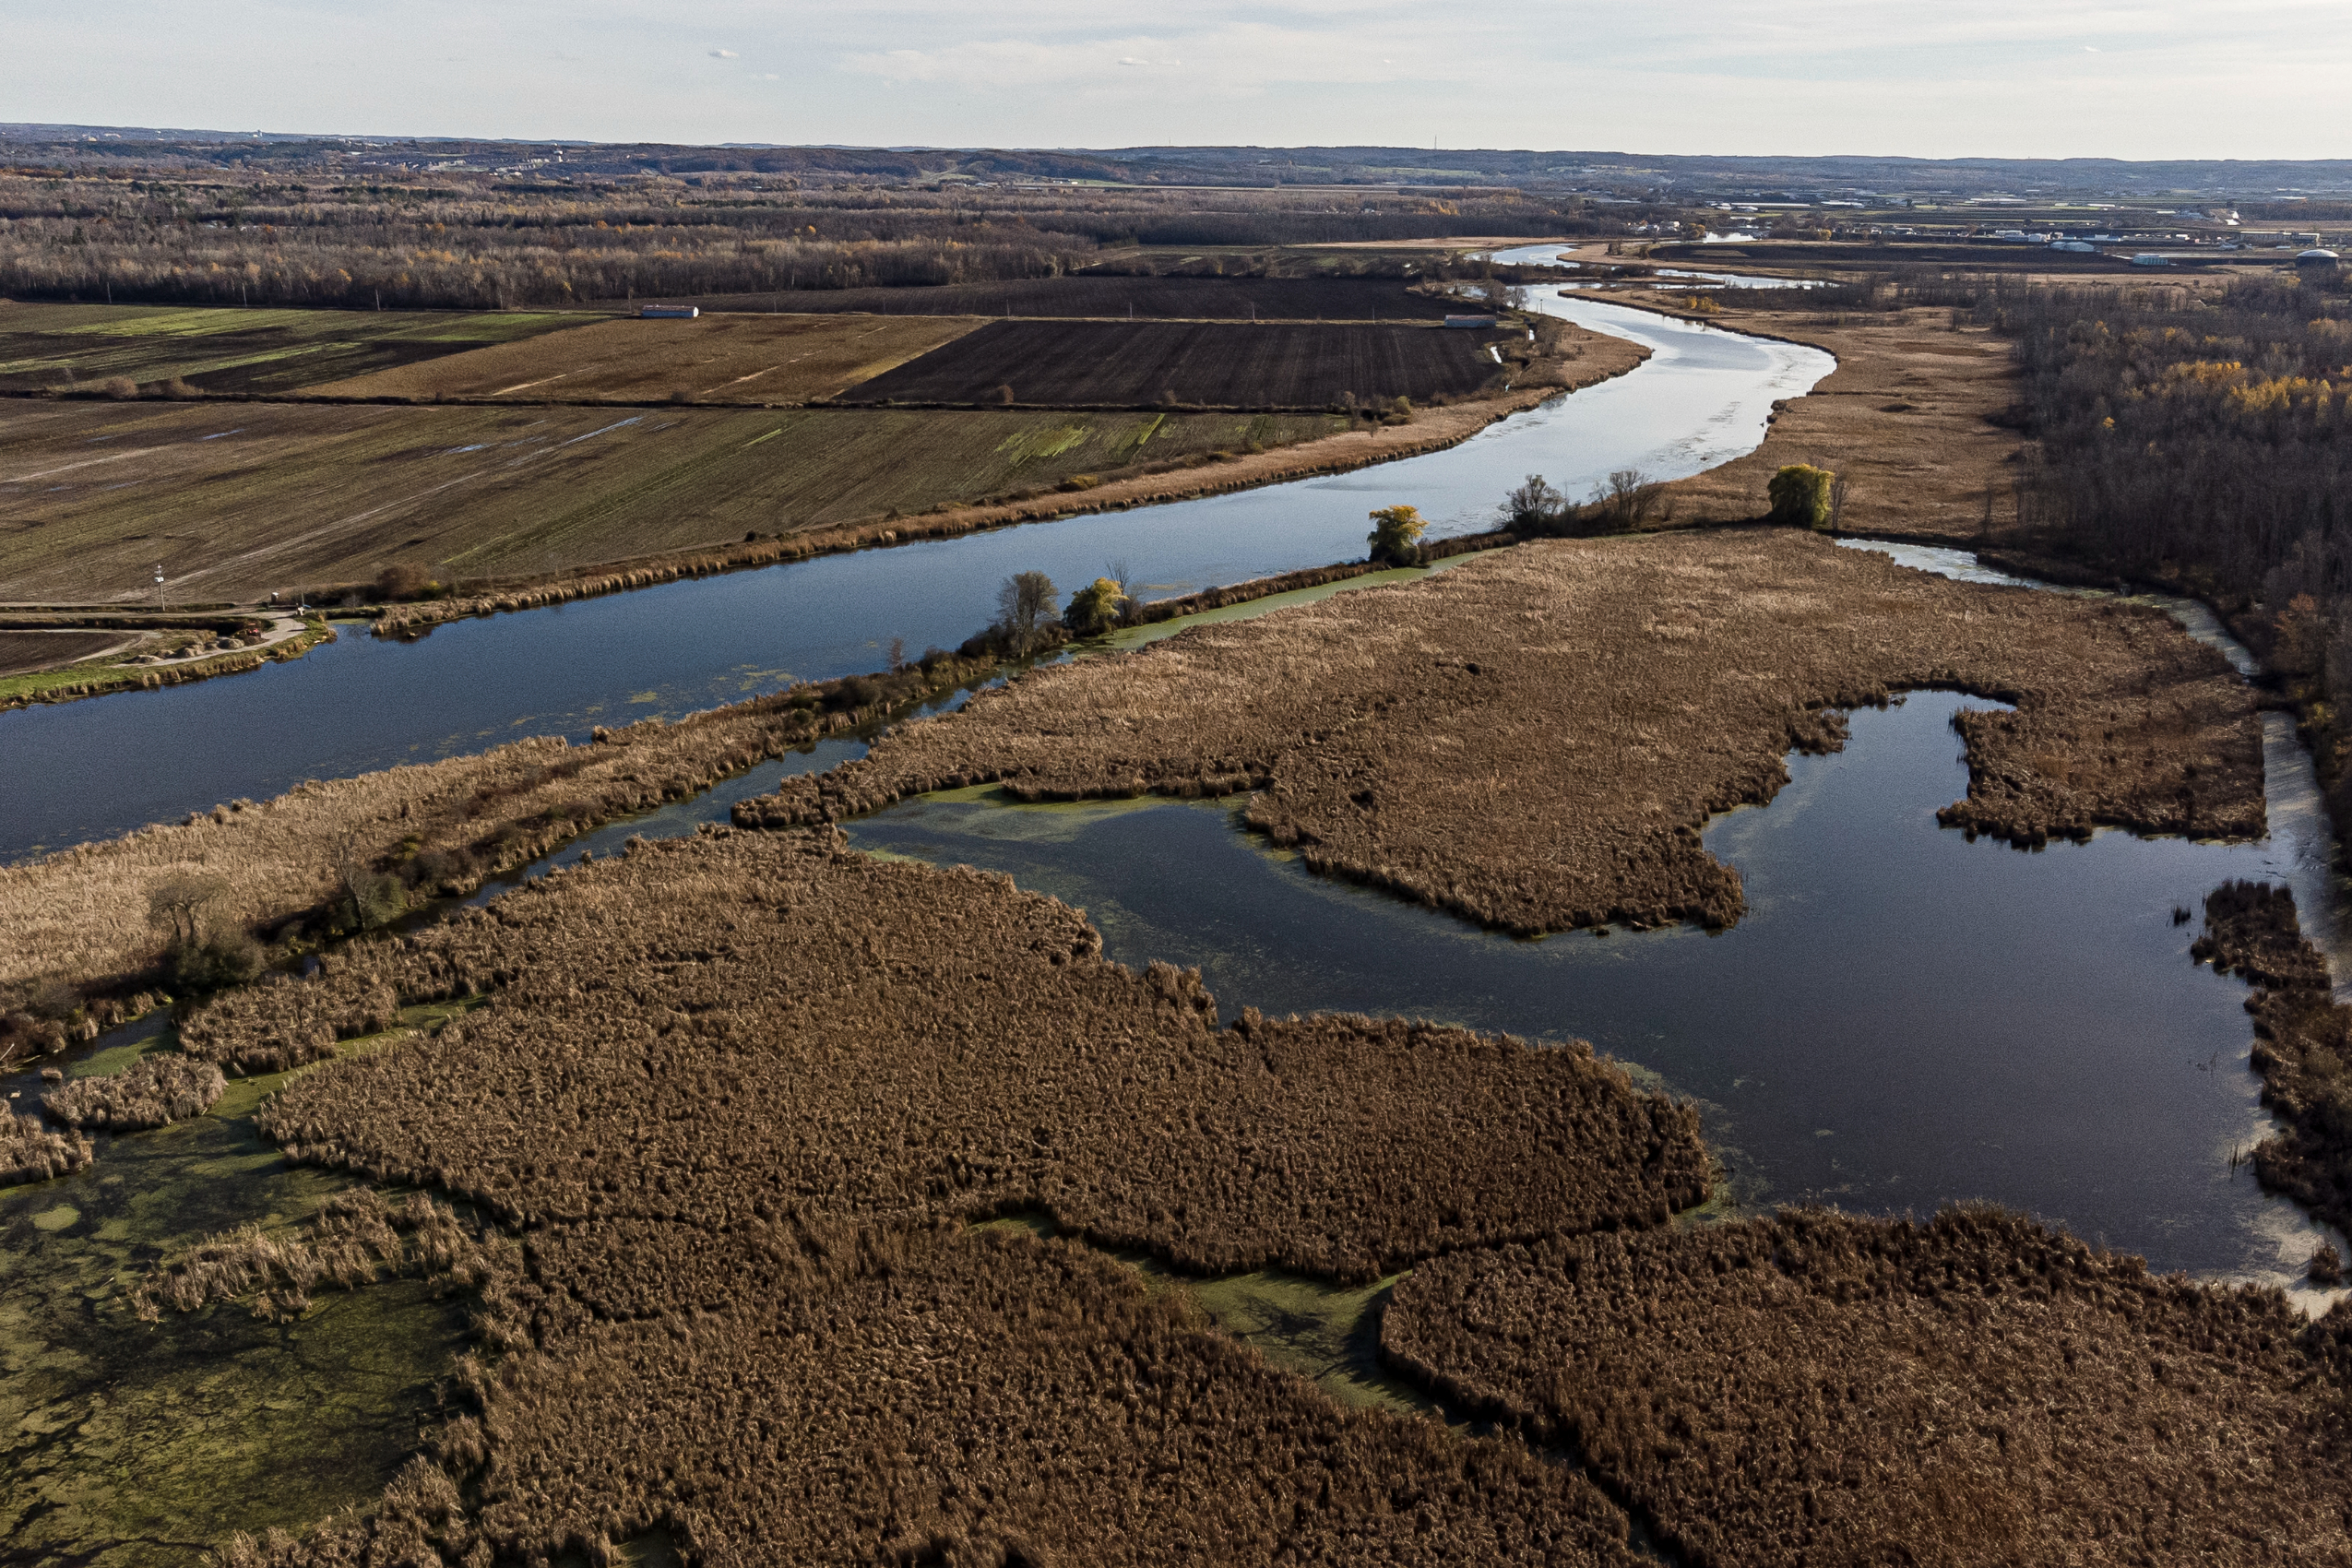 An aerial view of a bend in the Holland River and farmland